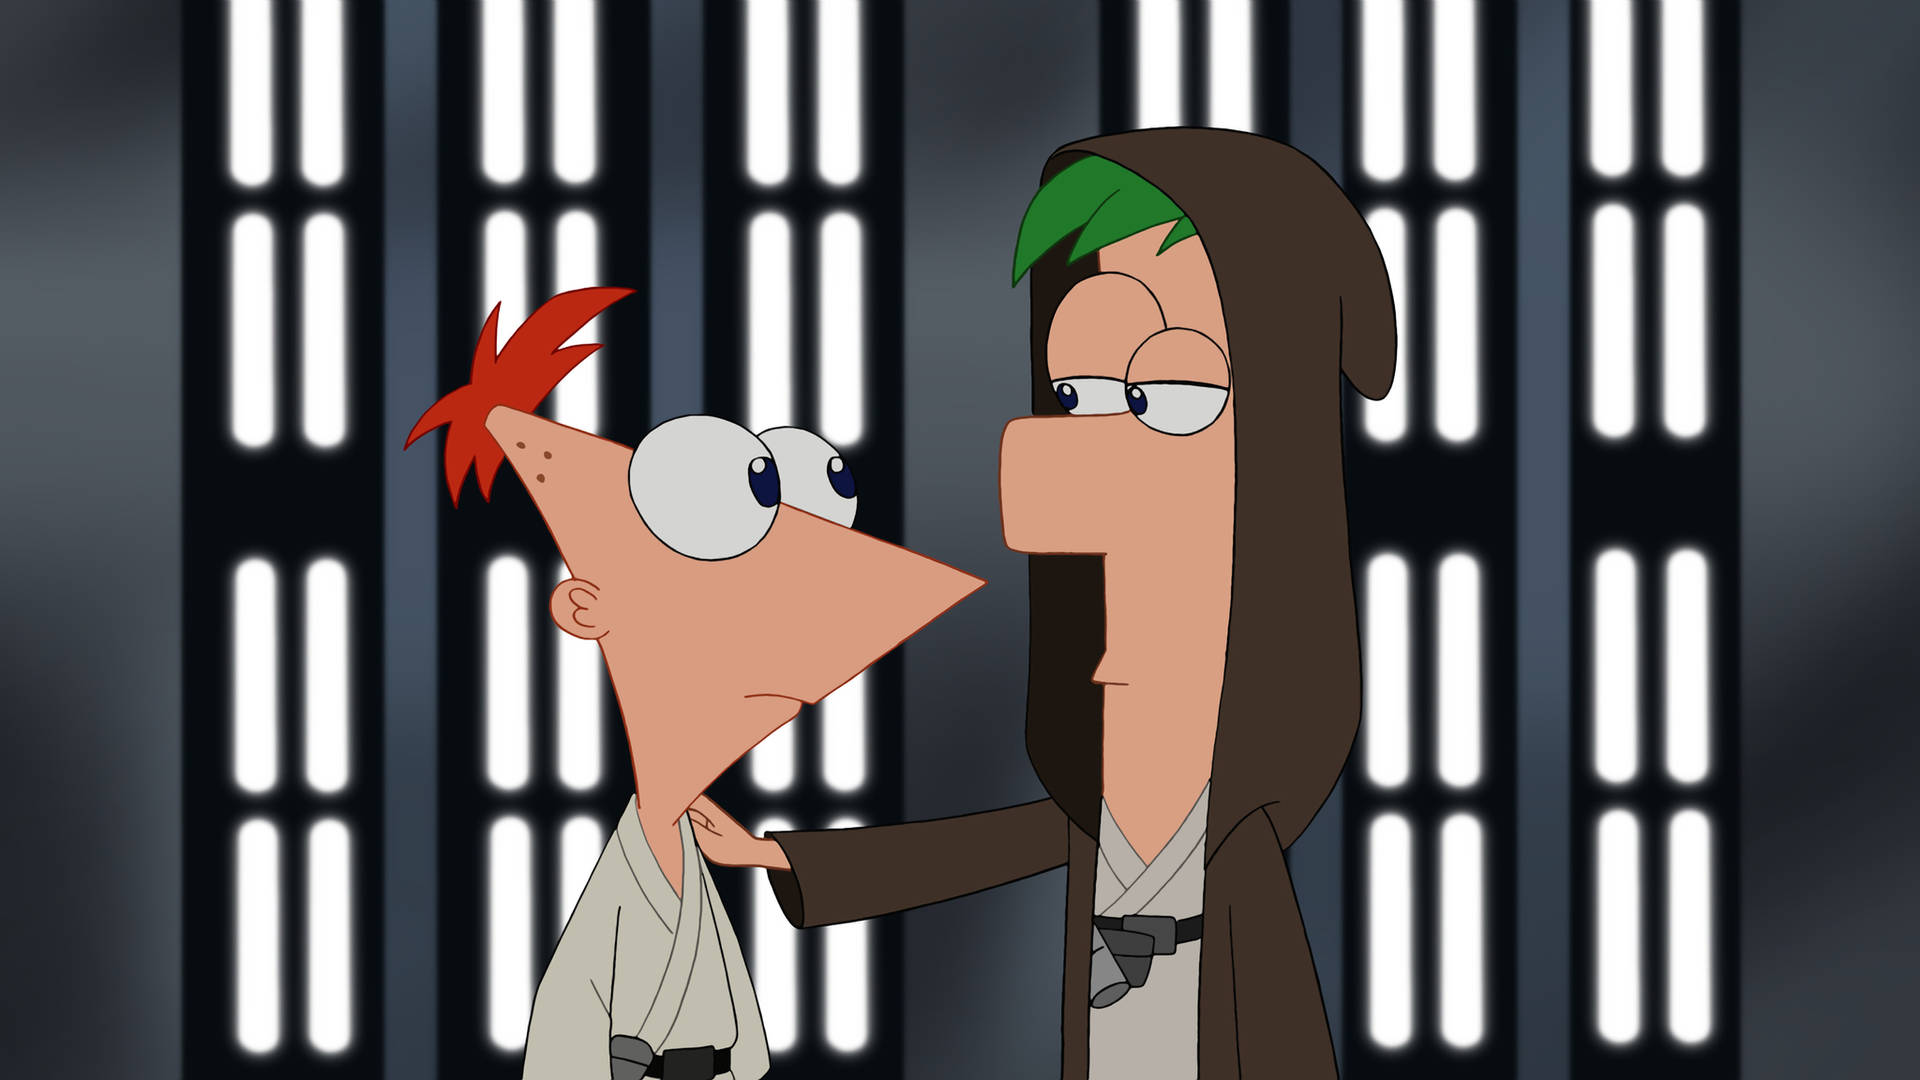 Phineas And Ferb Star Wars Crossover